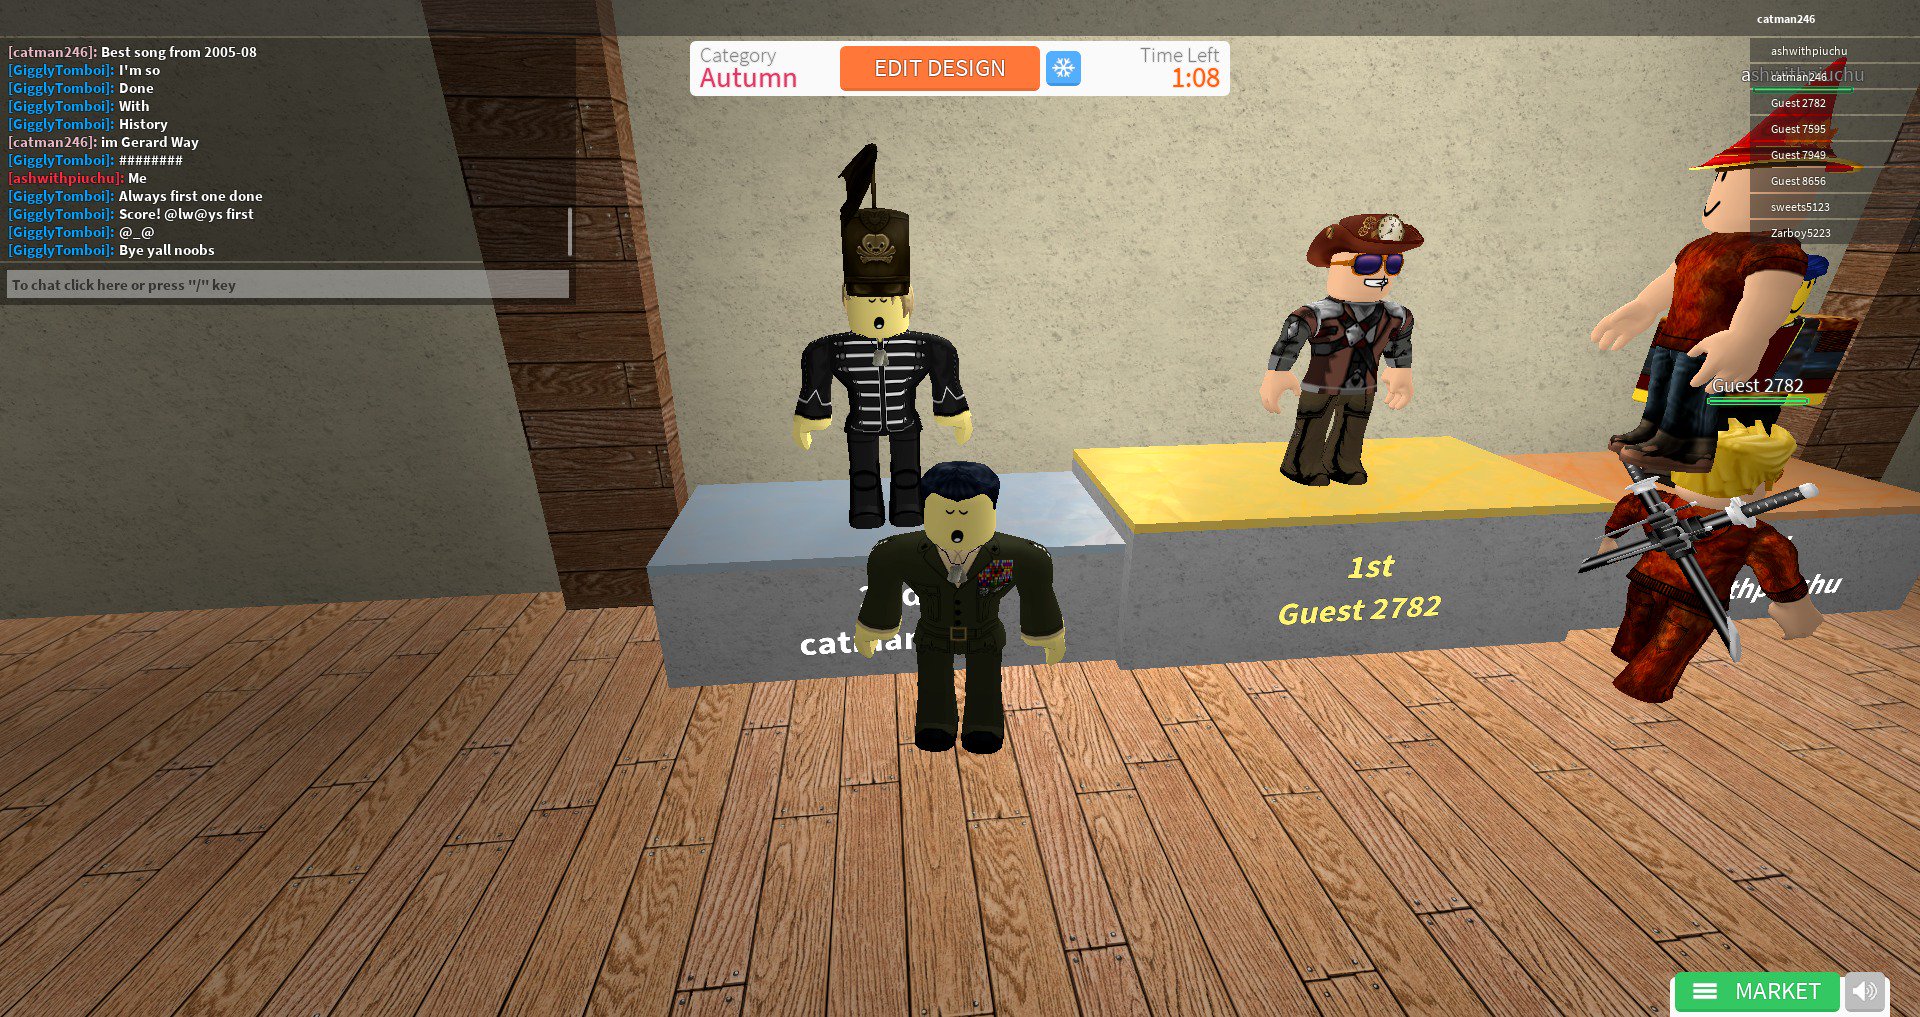 Tate Mcloughlin On Twitter Kranickfbe Also Made Two Gerardway Design In The Same Roblox Game That Won Gerardway Mcr Roblox - gerard way roblox